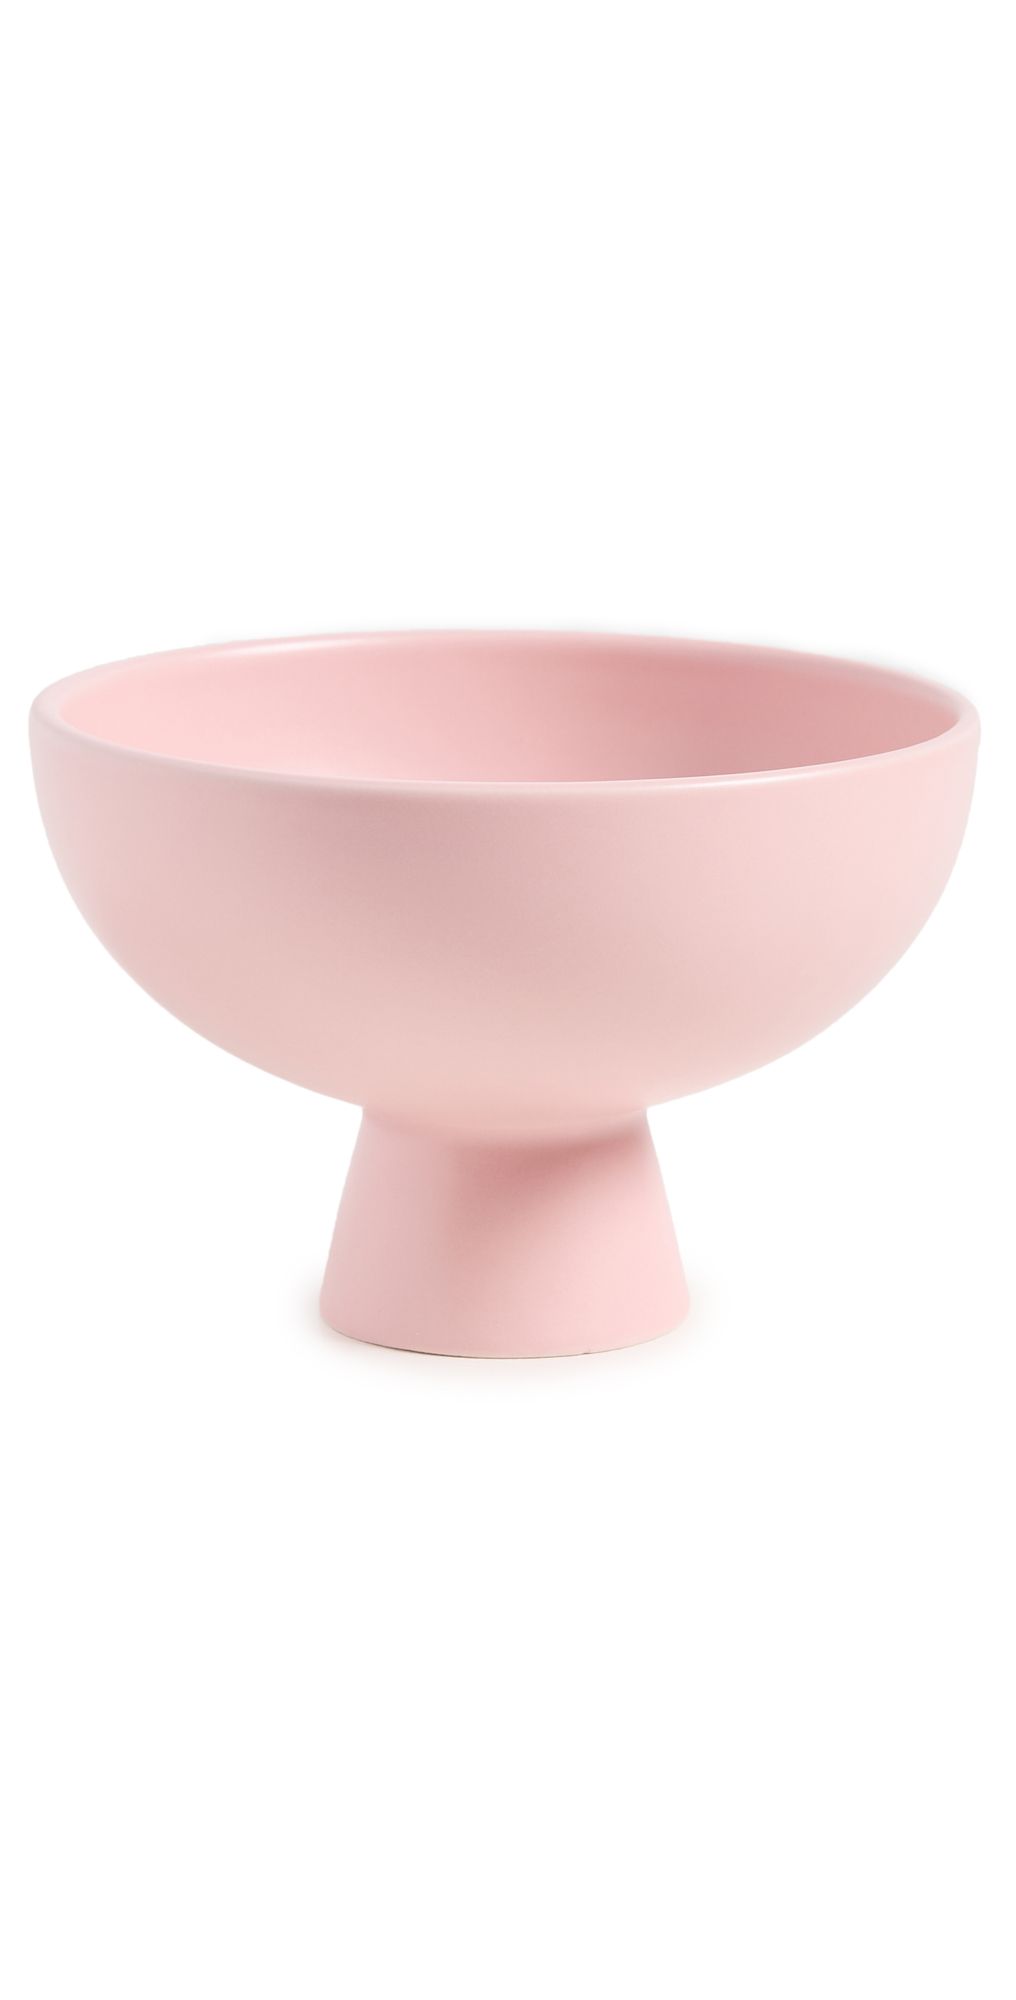 Raawii Small Strom Bowl | Shopbop